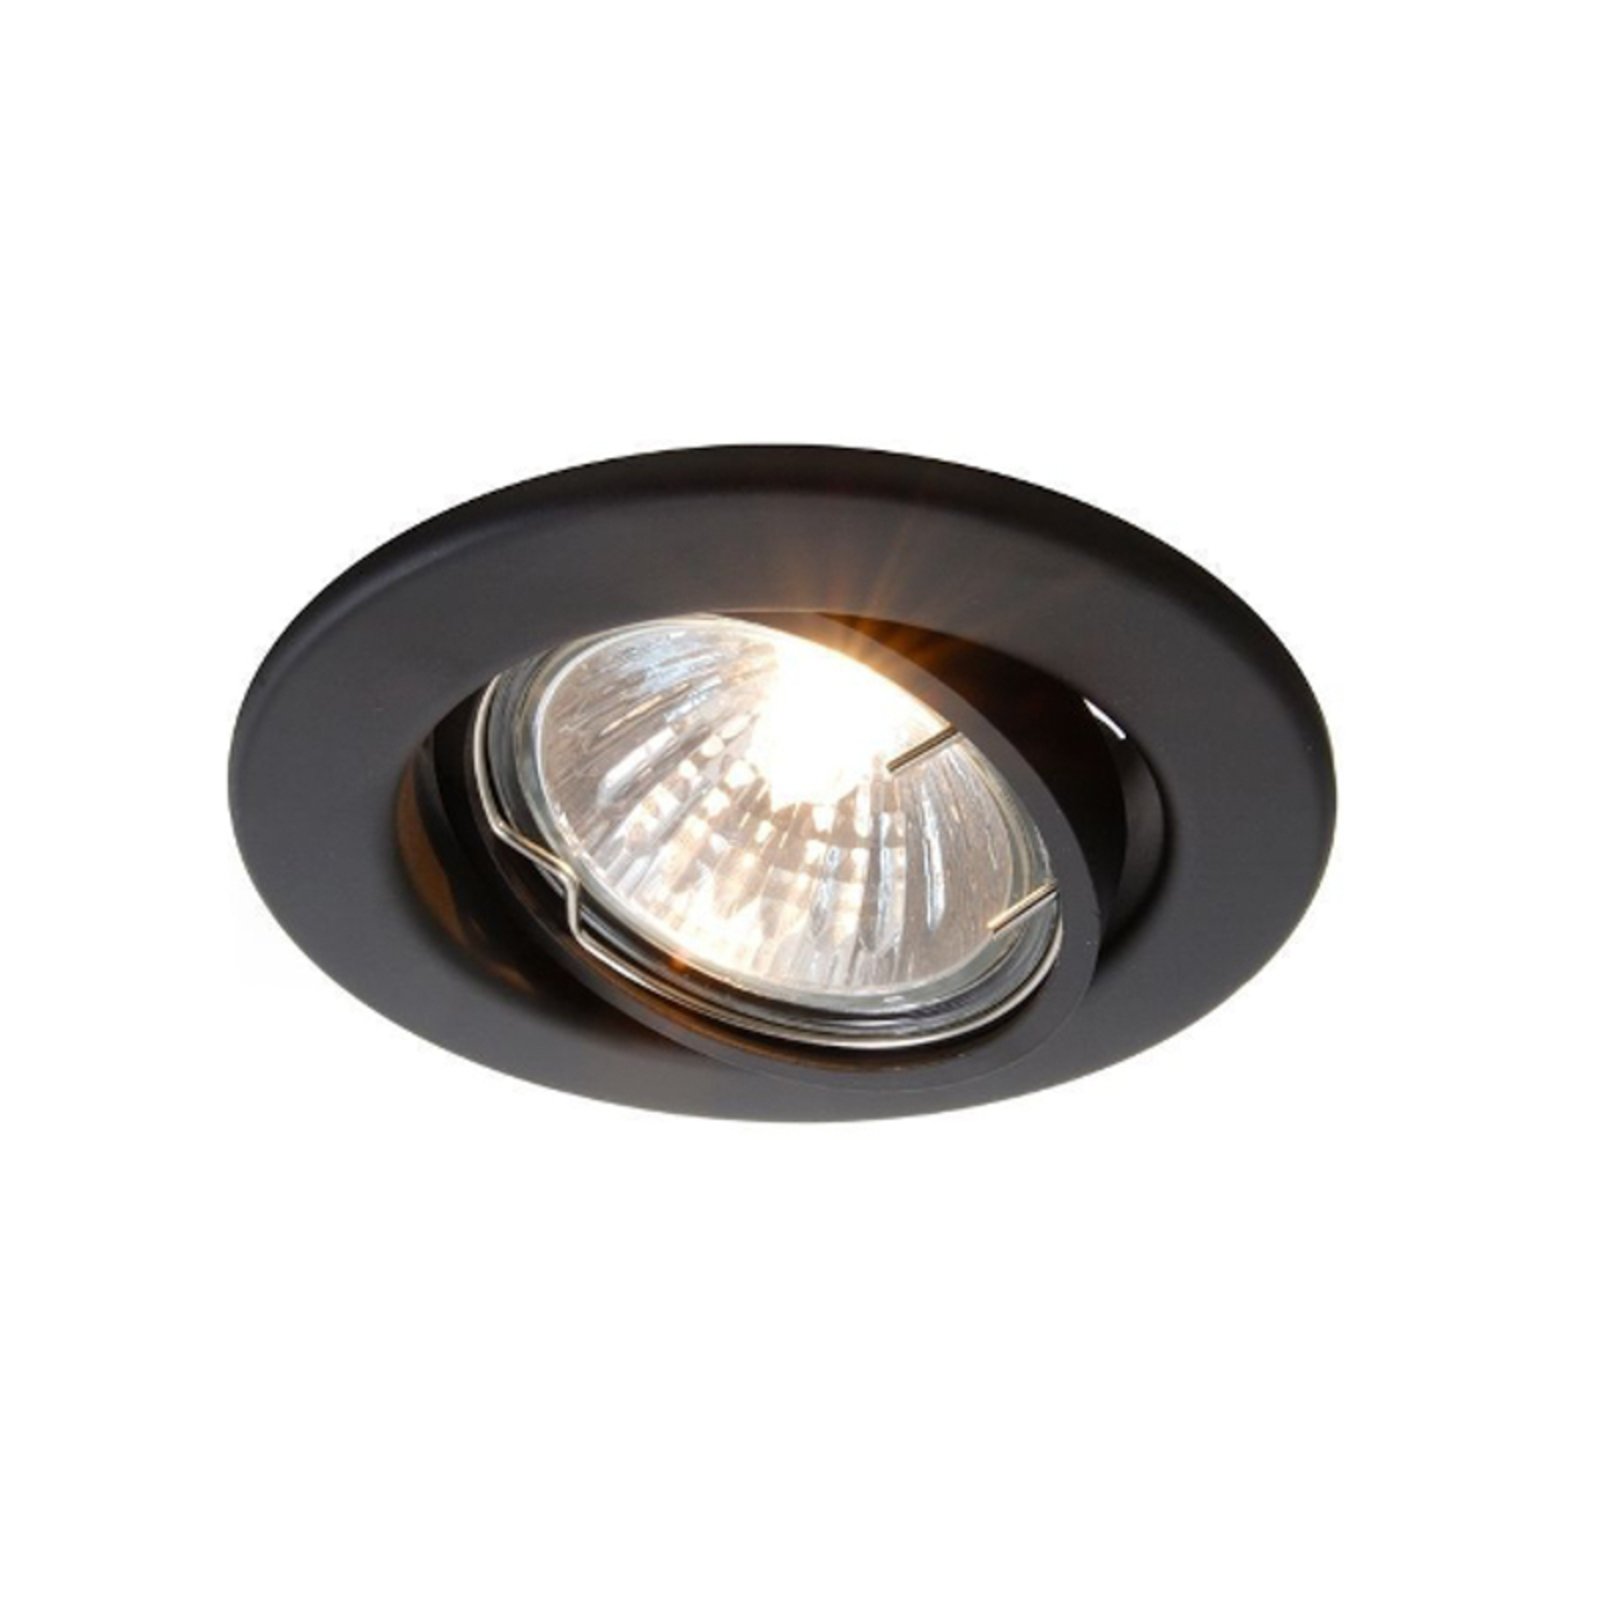 Recessed spotlight GU10 without a bulb, black